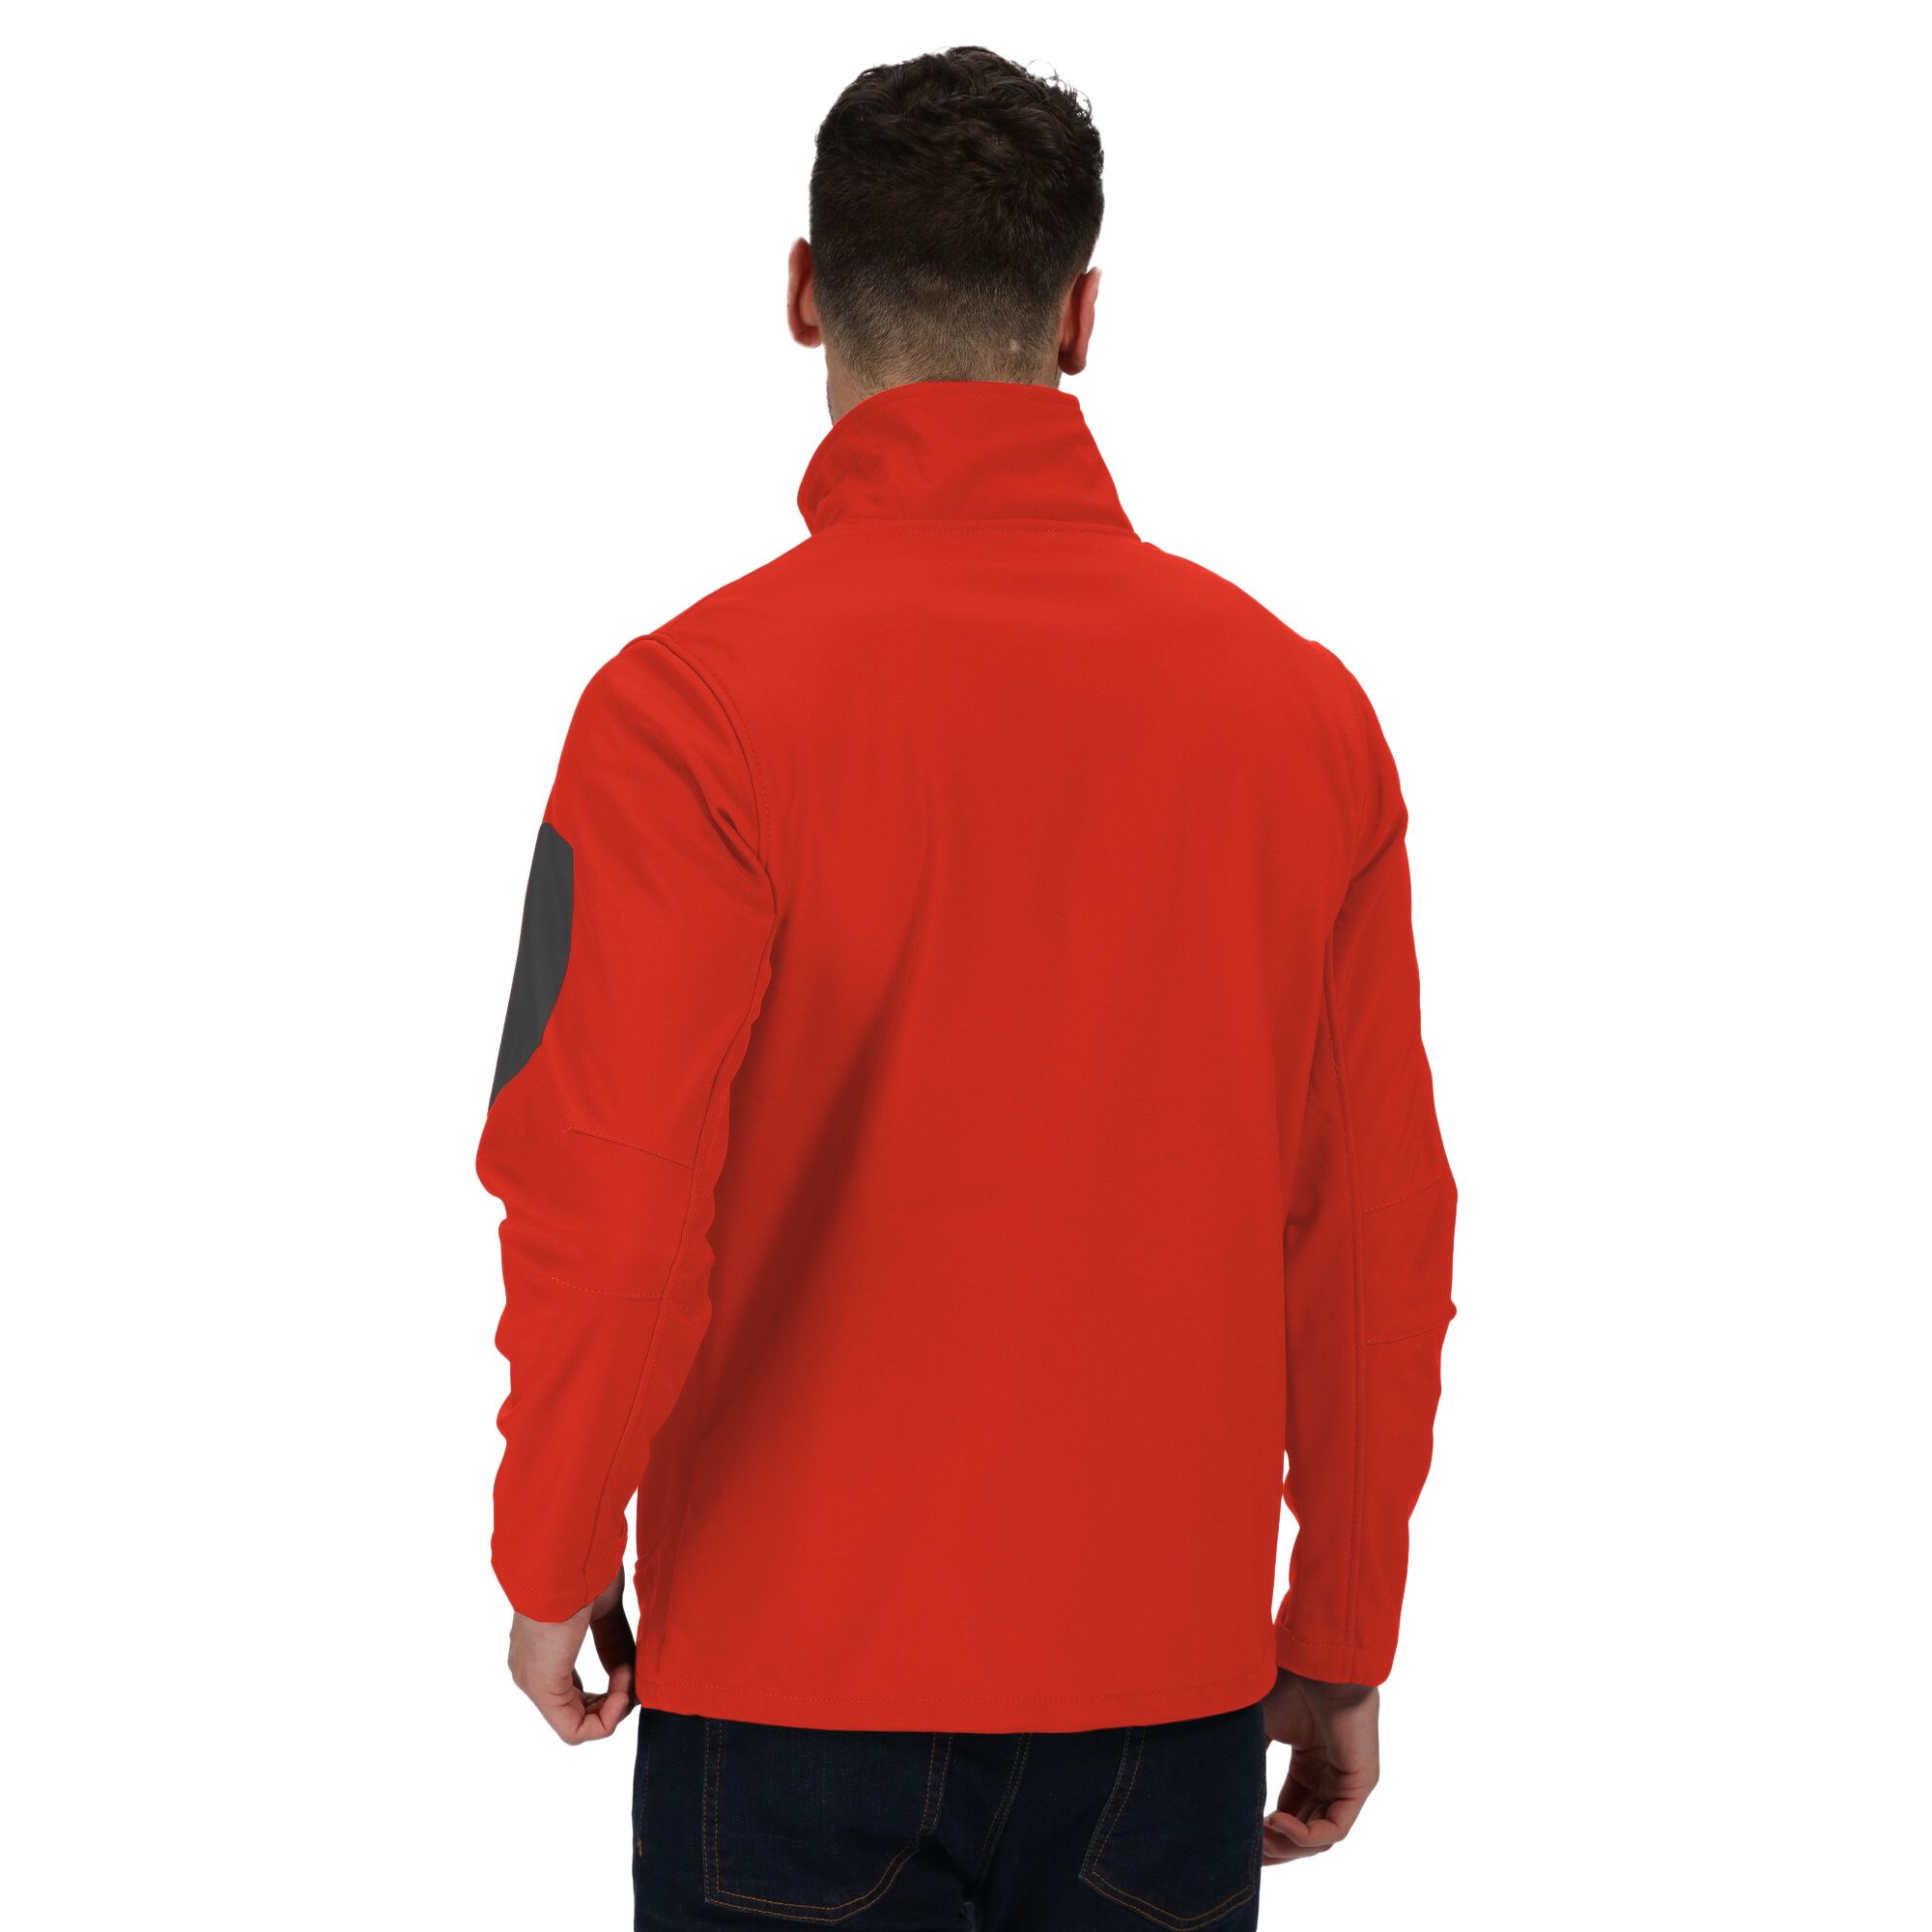 96% Polyester, 4% Elastane. 2 zipped lower and 1 chest pocket. 1 zipped sleeve pocket. Adjustable cuffs. Adjustable shockcord hem. Inner zip guard. Fabric: Warm backed woven Softshell XPT waterproof and breathable 3 layer membrane fabric. Wind resistant membrane fabric. Atl durable water repellent finish. Regatta Standout Mens sizing (chest approx.): XS (36in/92cm), S (38in/97cm), M (40in/102cm), L (42in/107cm), XL (44in/112cm), XXL (47in/119cm), XXXL (50in/127cm), XXXXL (53in/134.5cm).